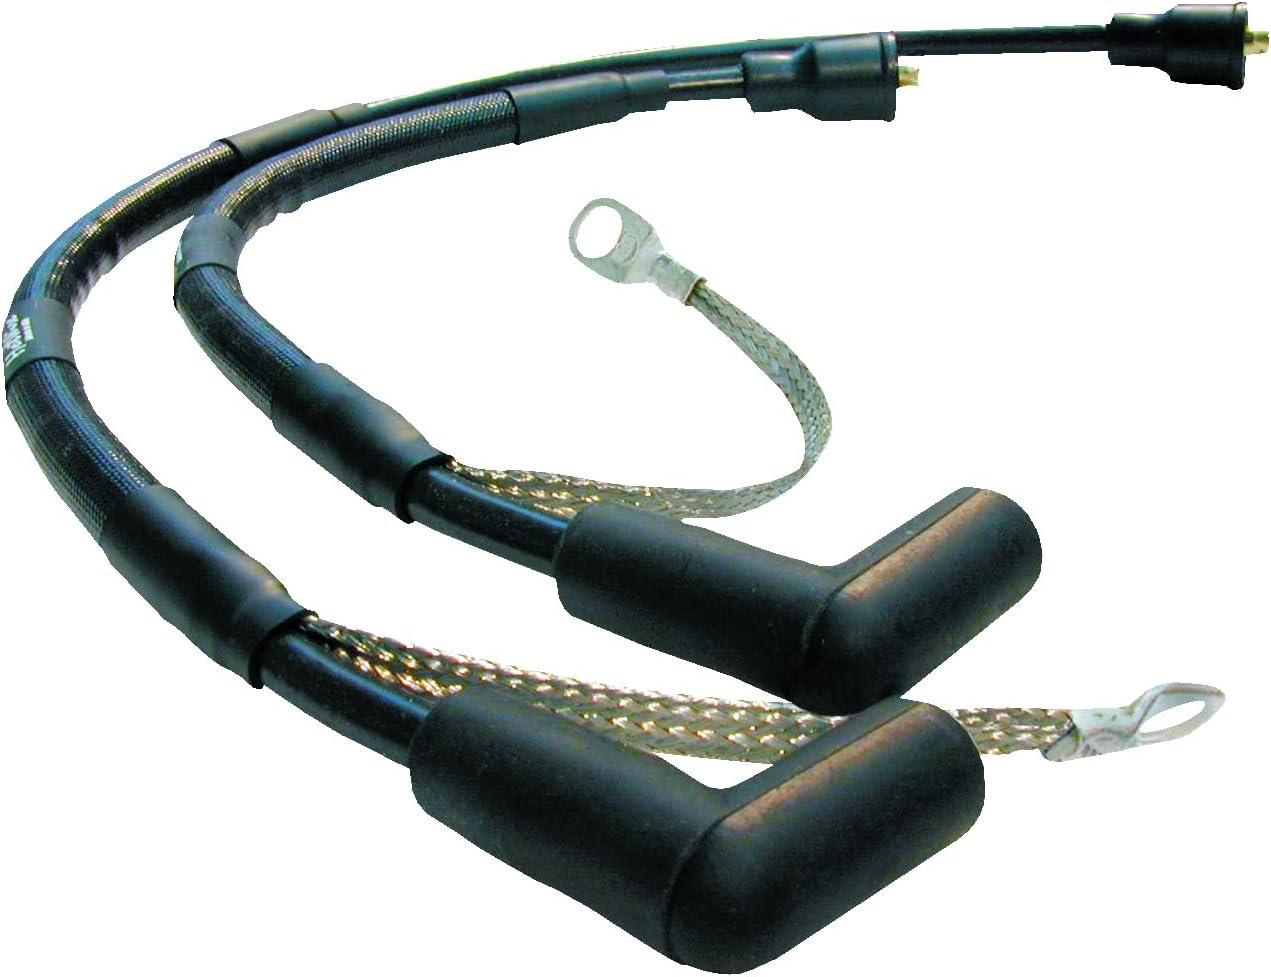 Nology Hot Wires for Triumph Motorcycles - Black